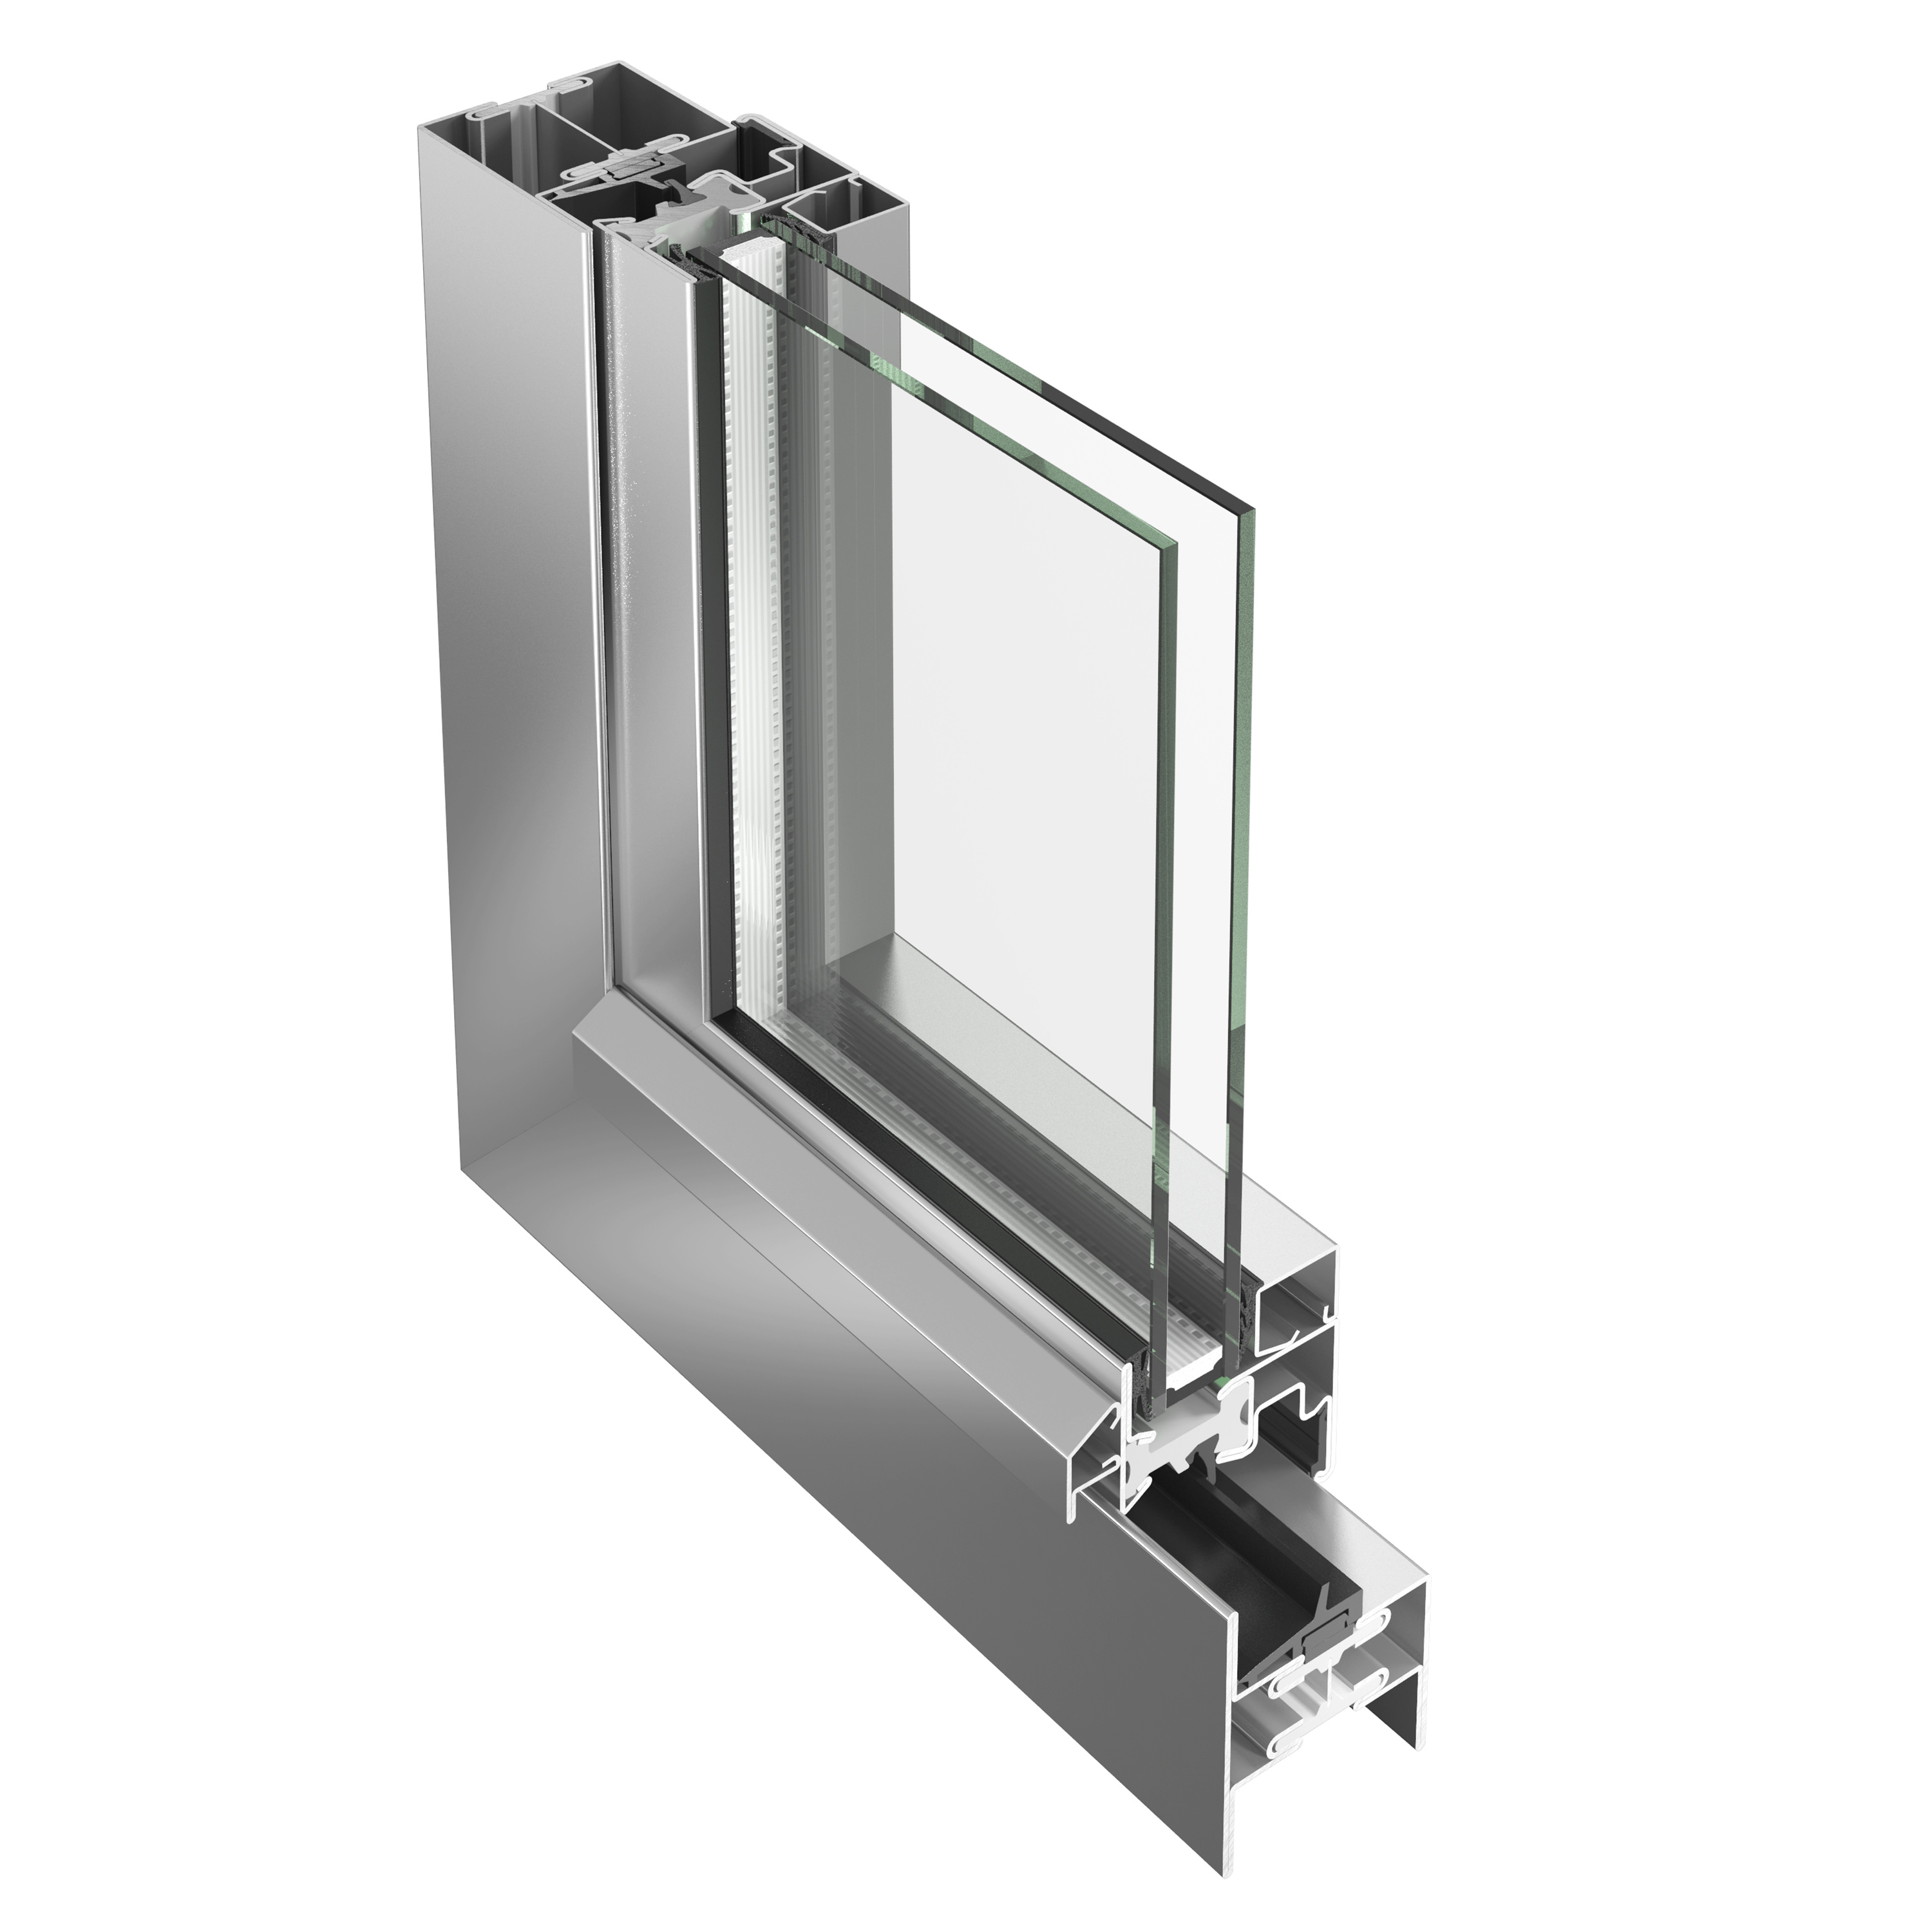 Janisol steel and stainless steel windows